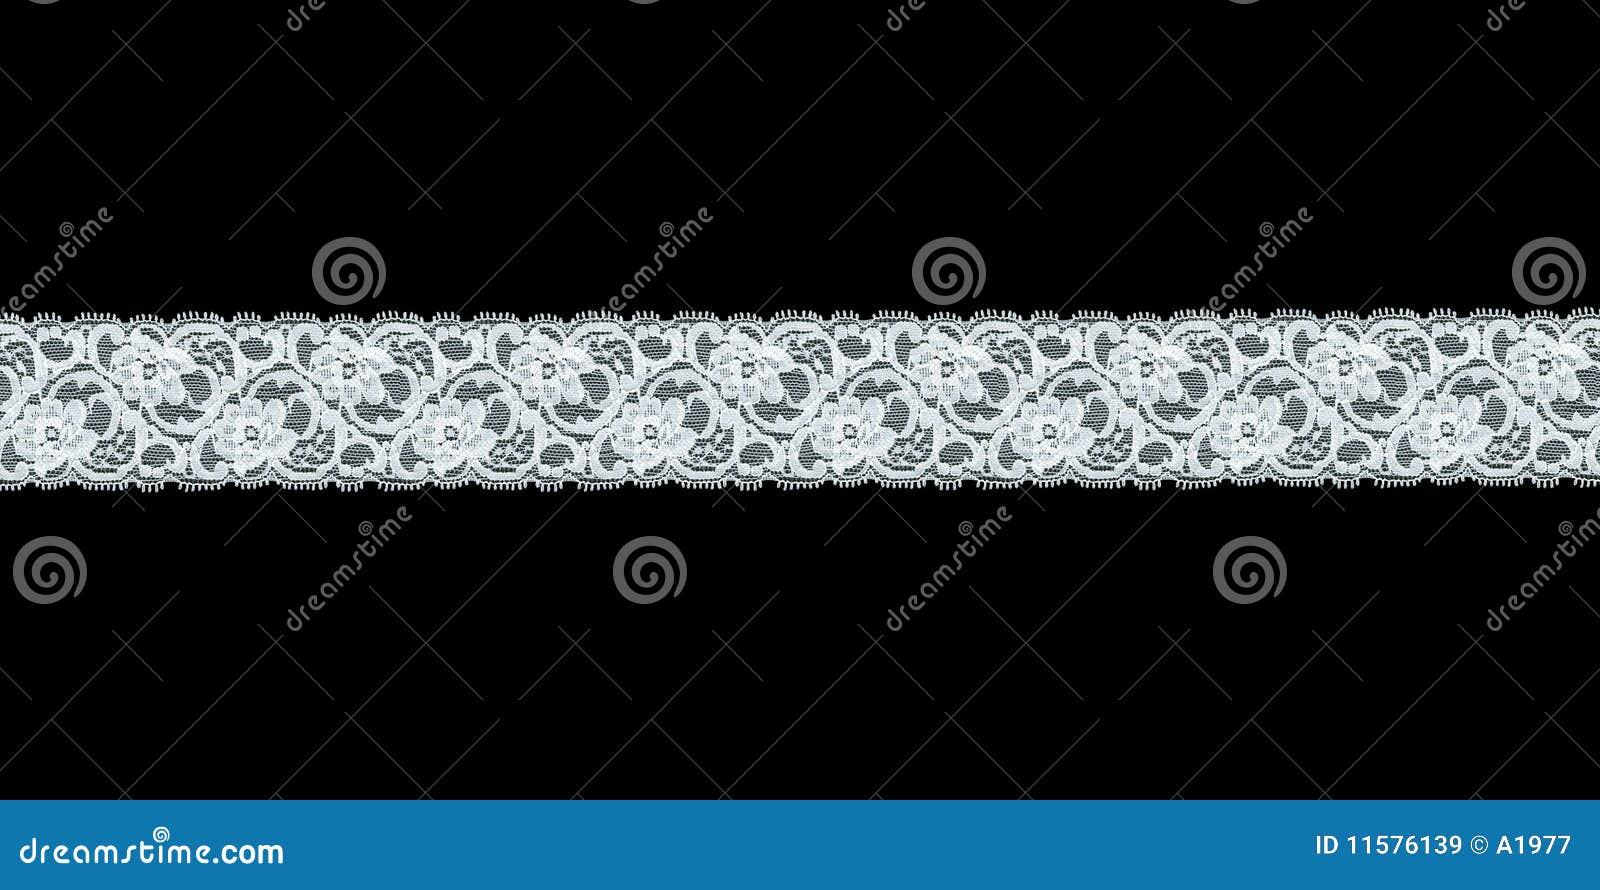 White Or Ecru Floral Lace Band Stock Photo - Download Image Now